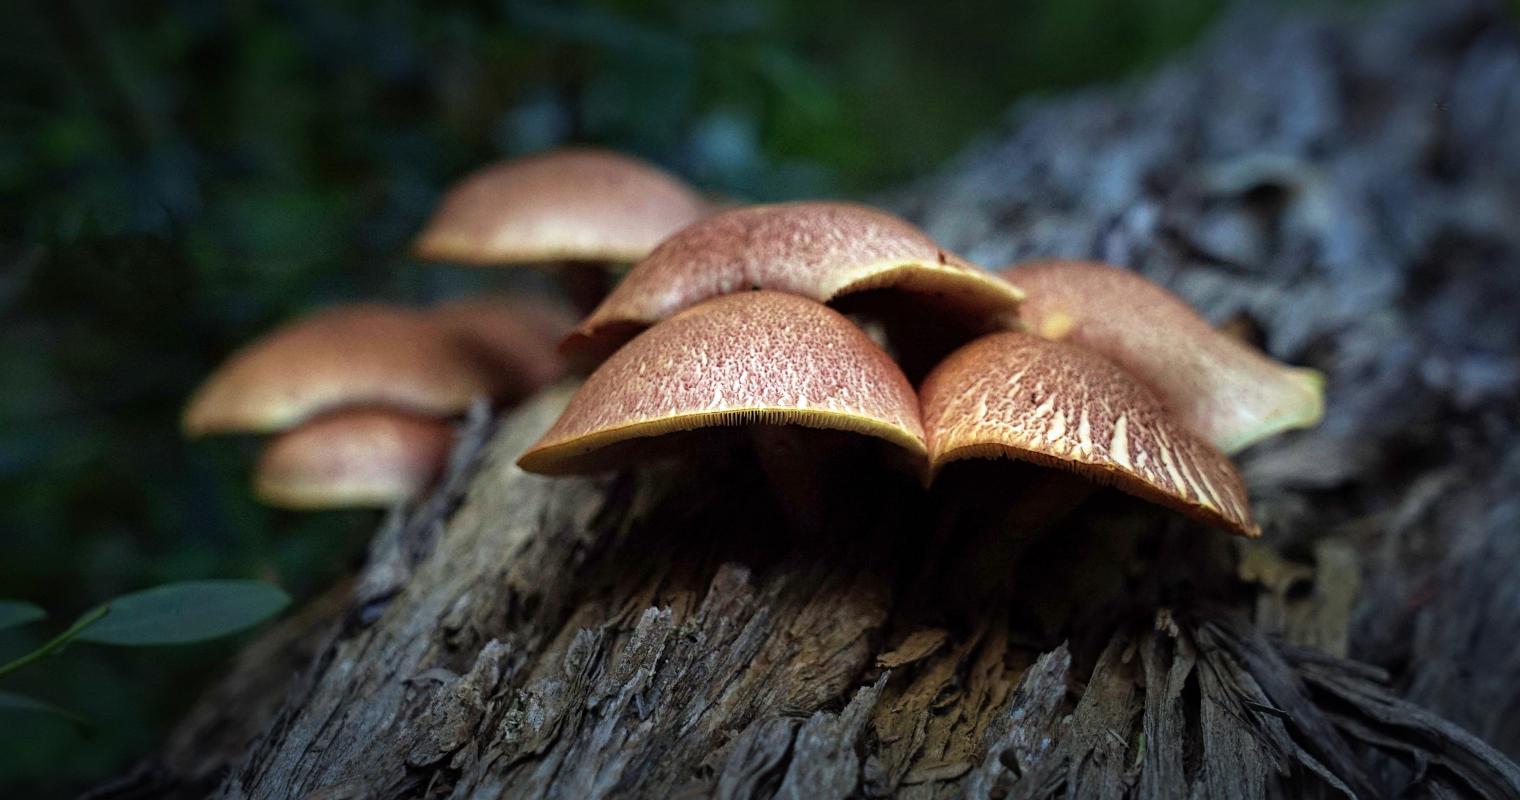 image of mushrooms growing on the side of a tree